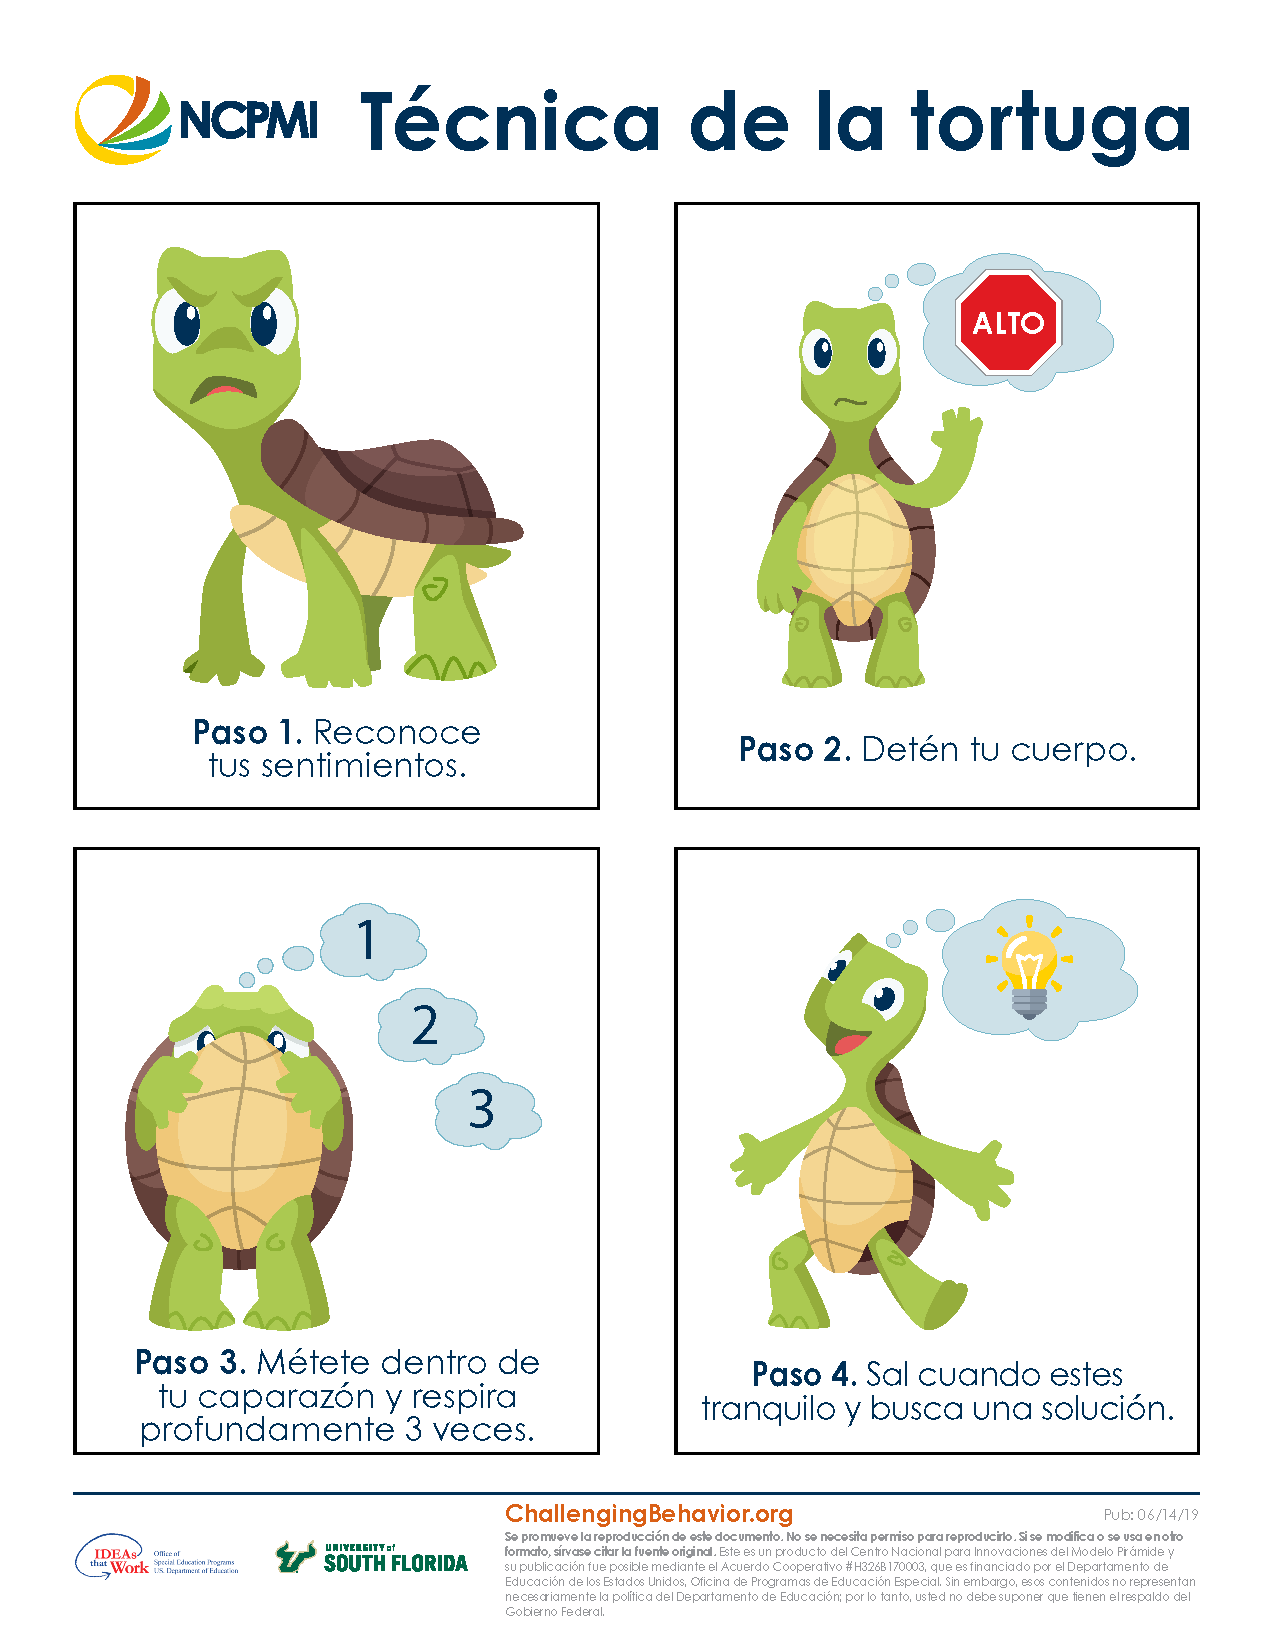 Turtle Technique Steps in Spanish Thumbnail image